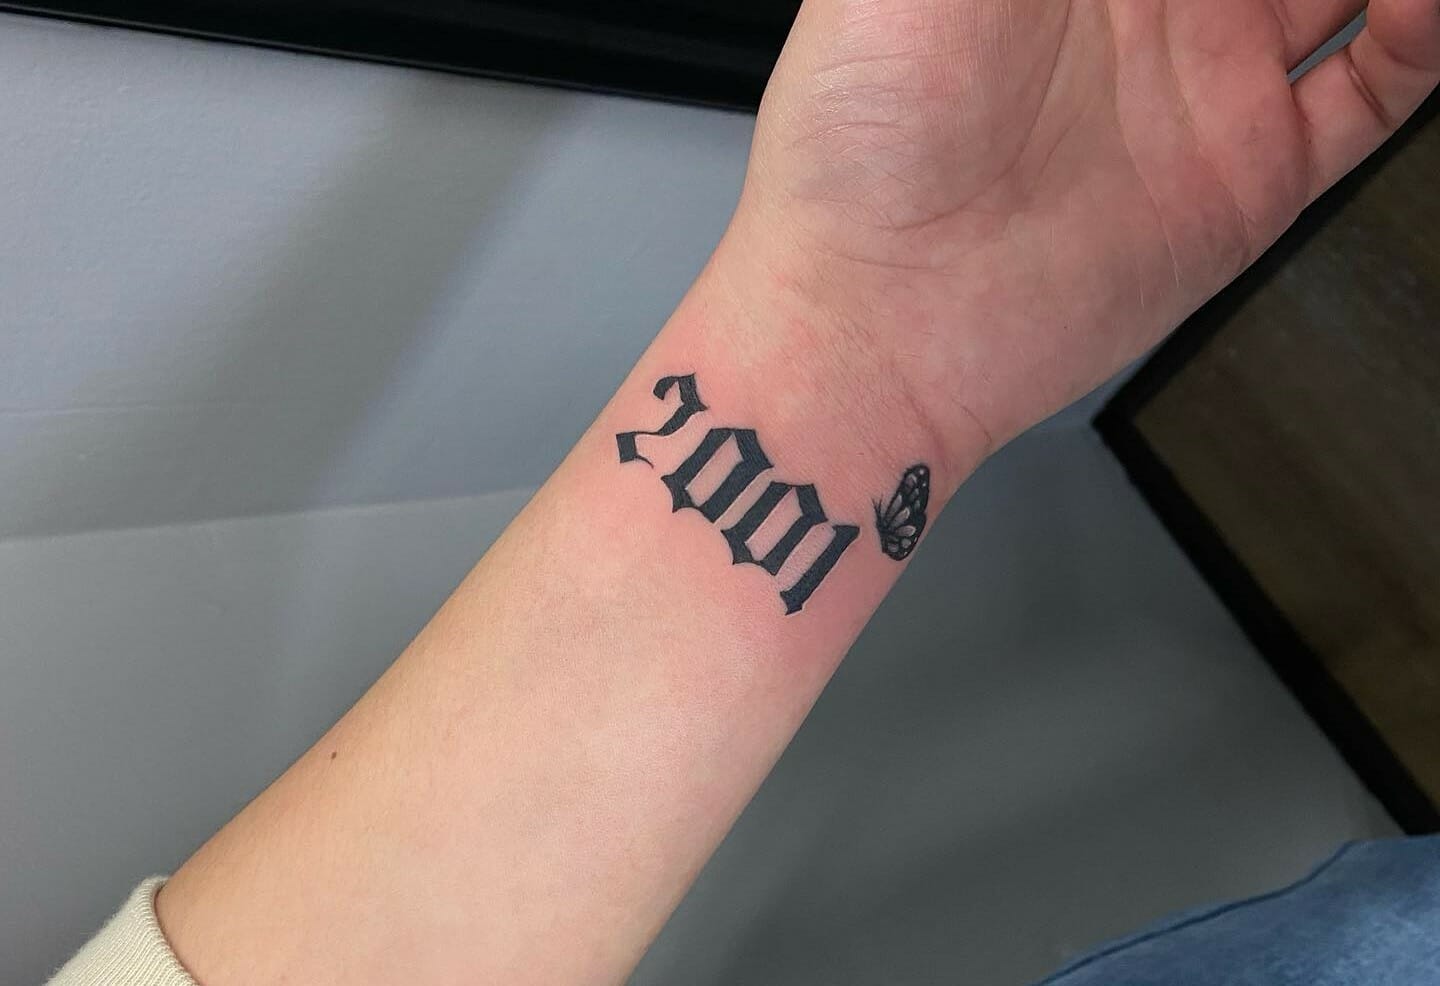 12 Small Meaningful Tattoo Ideas You Wont Regret Getting